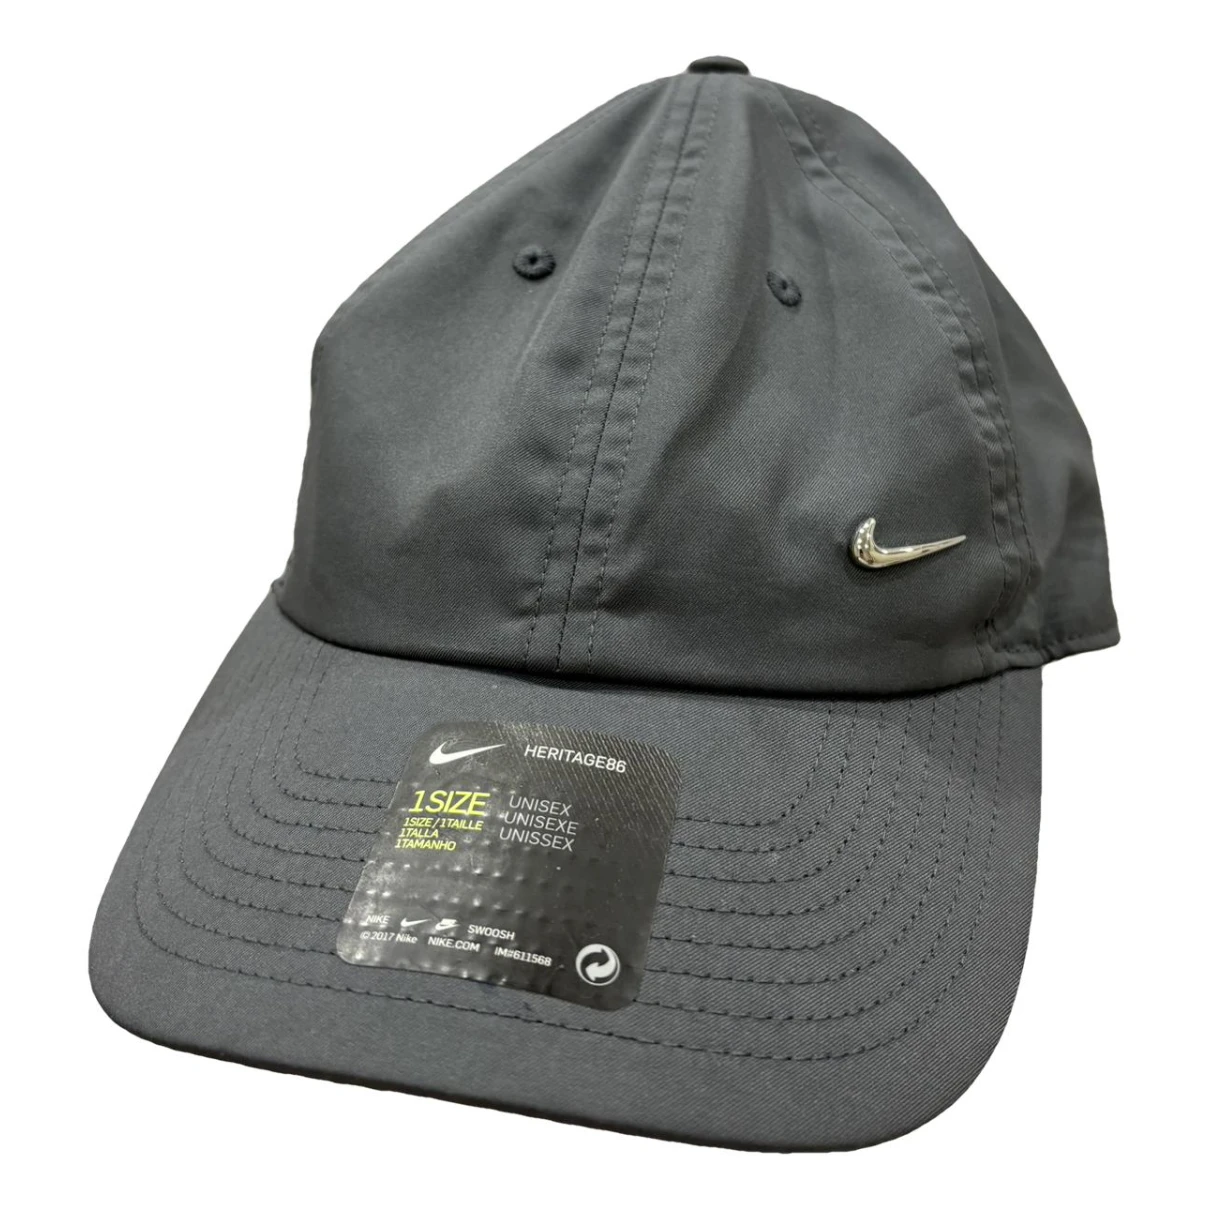 accessories Nike hats & pull on hats for Male Cotton L International. Used condition